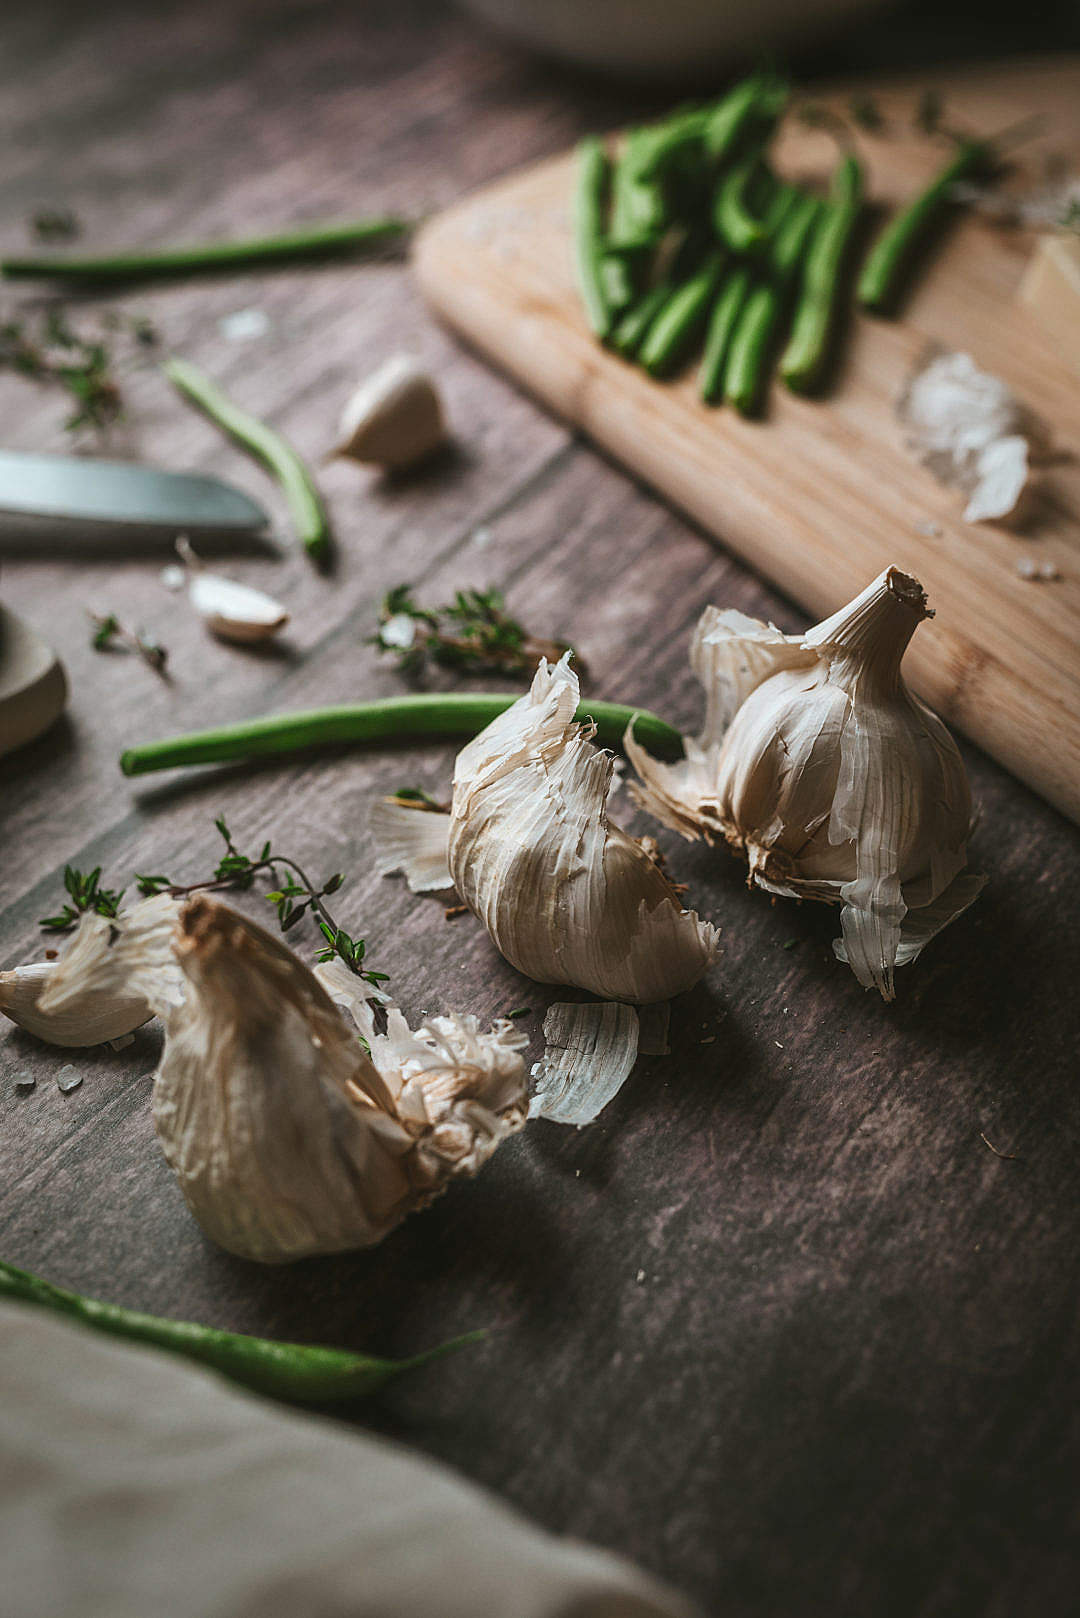 Download Garlic Head on a Wooden Rustic Table FREE Stock Photo